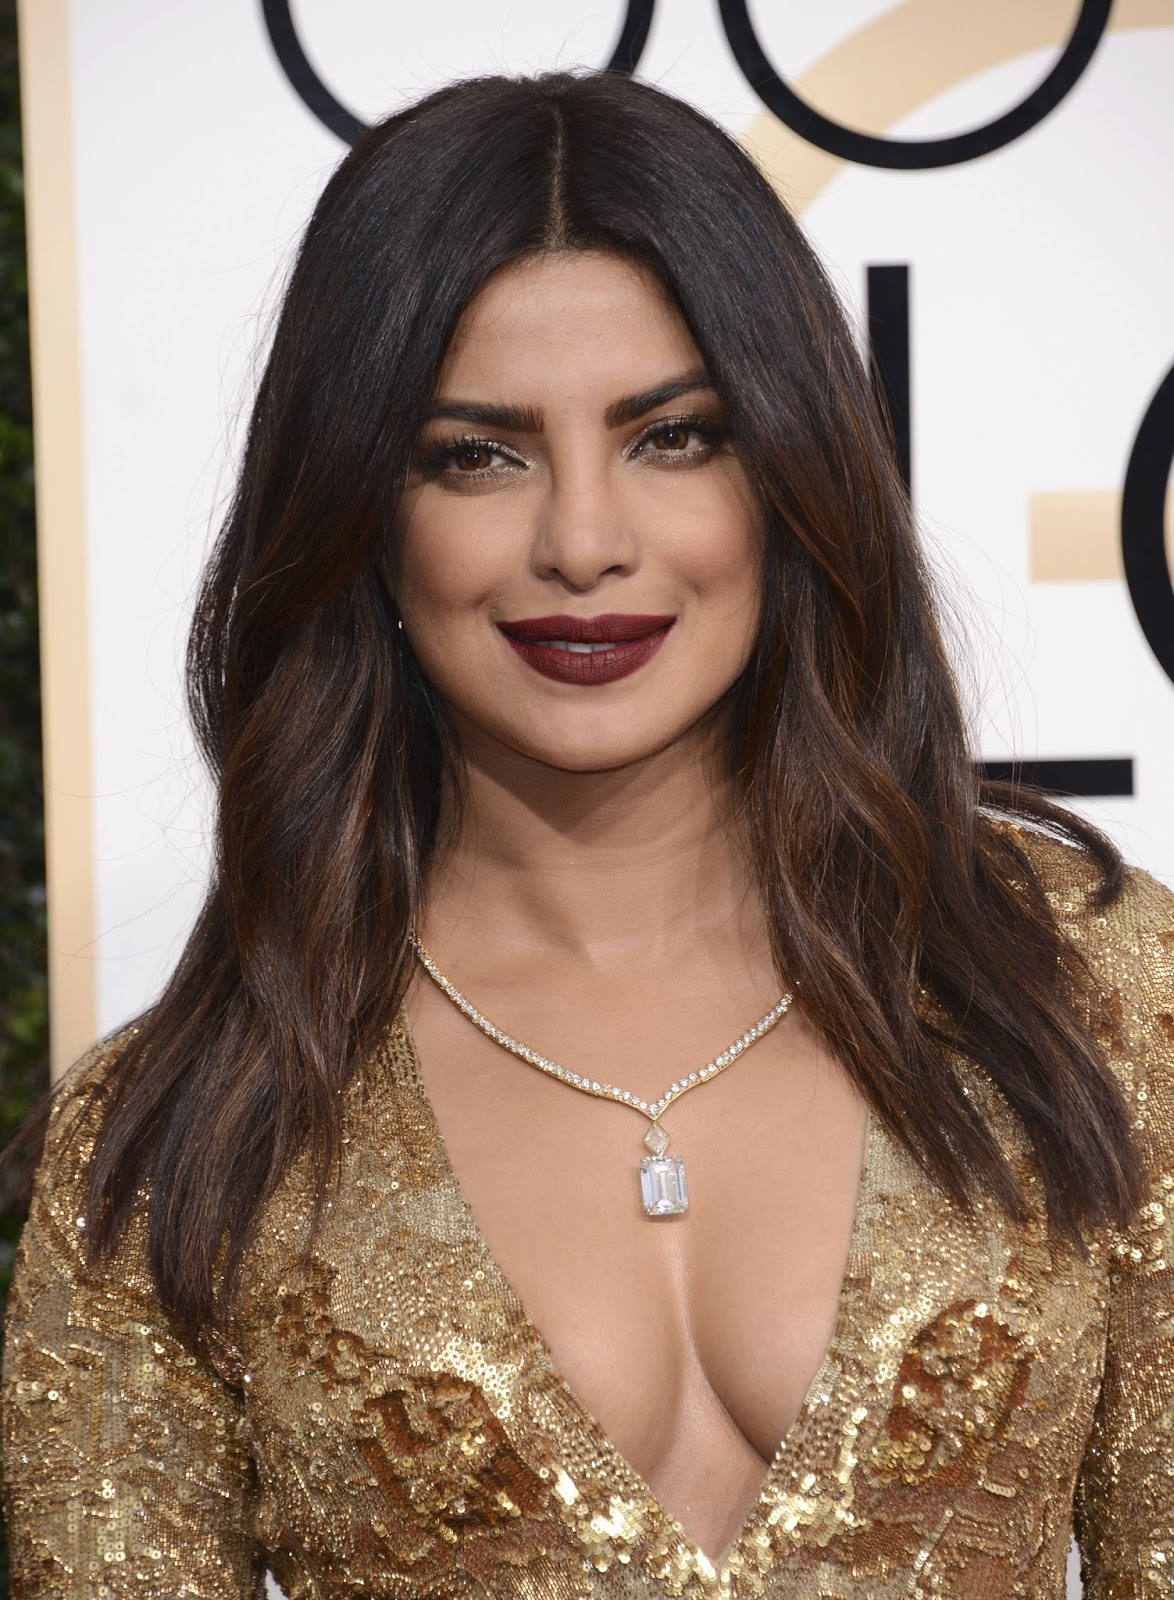 Priyanka Chopra Sexy Cleavage Show at The 74th Annual Golden Globe Awards at The Beverly Hilton Hotel in Beverly Hills